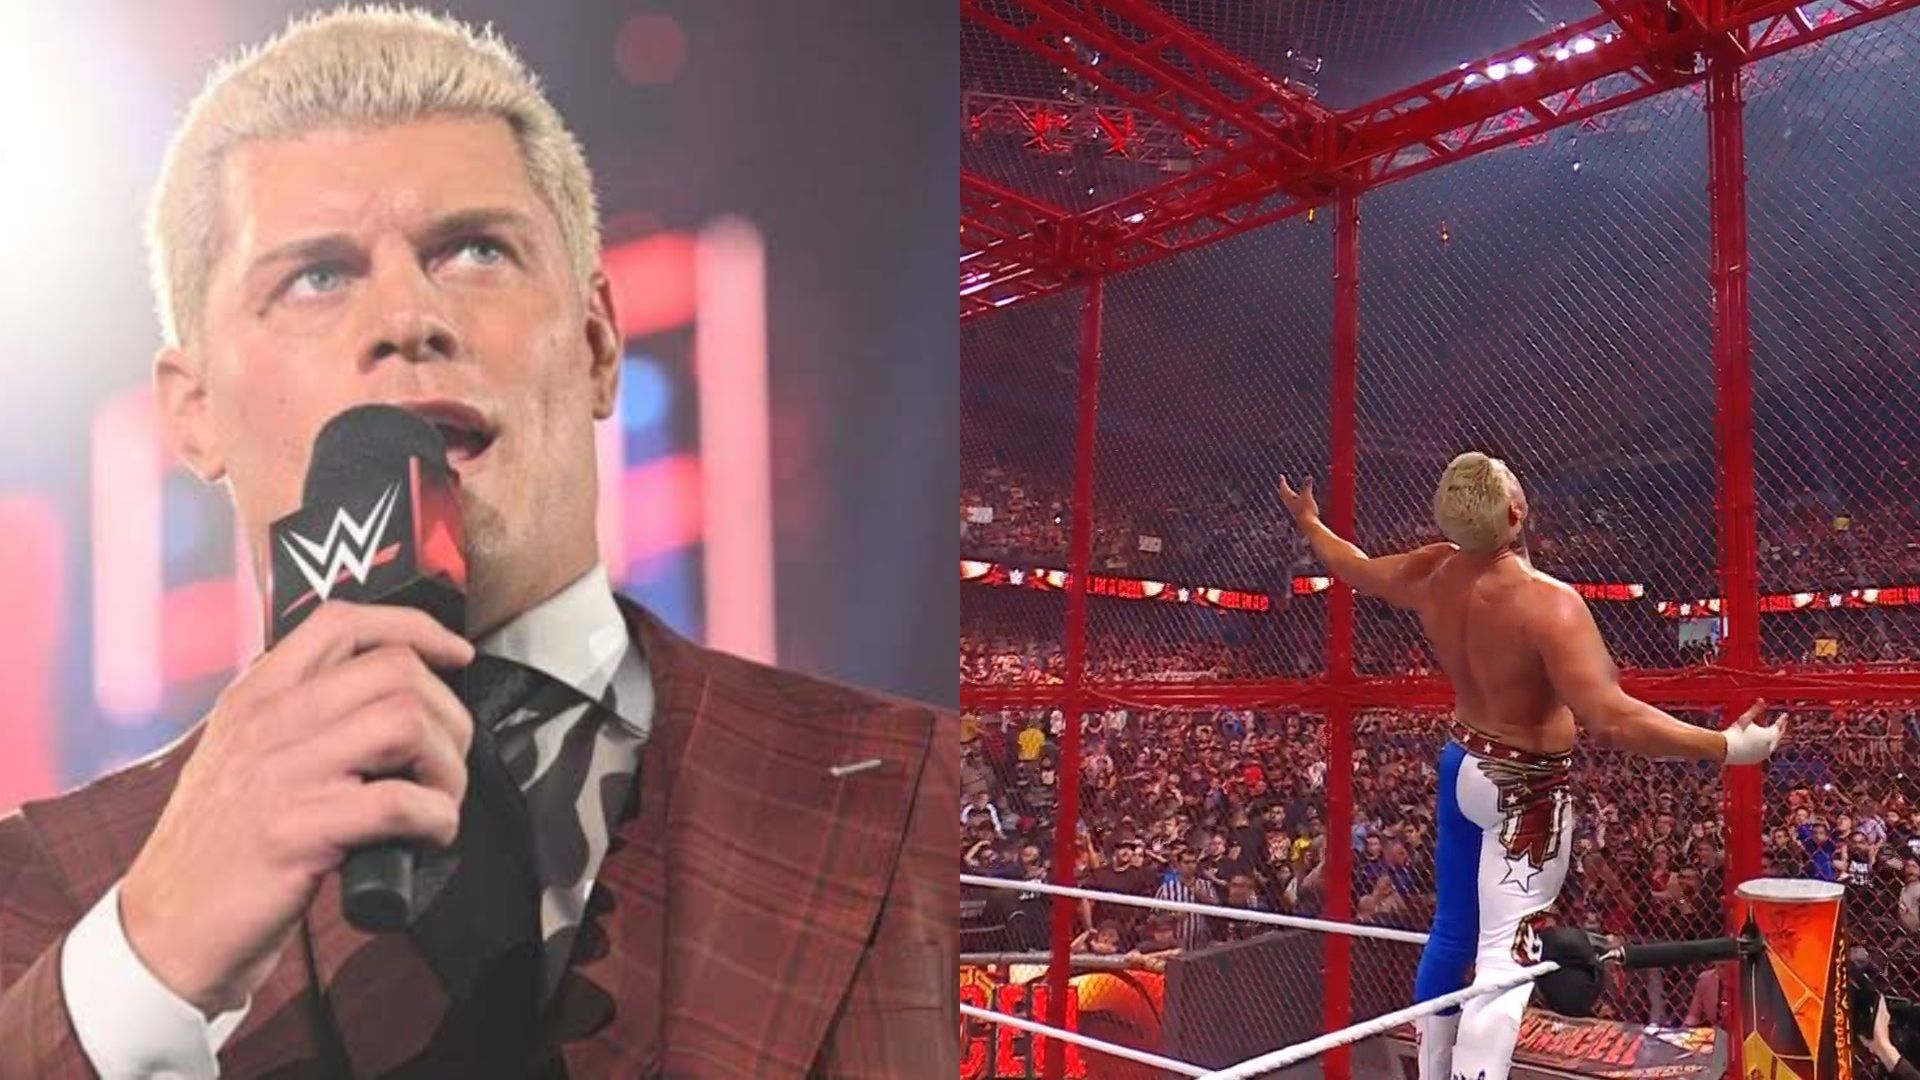 Cody Rhodes competed with an injury at HIAC 2022